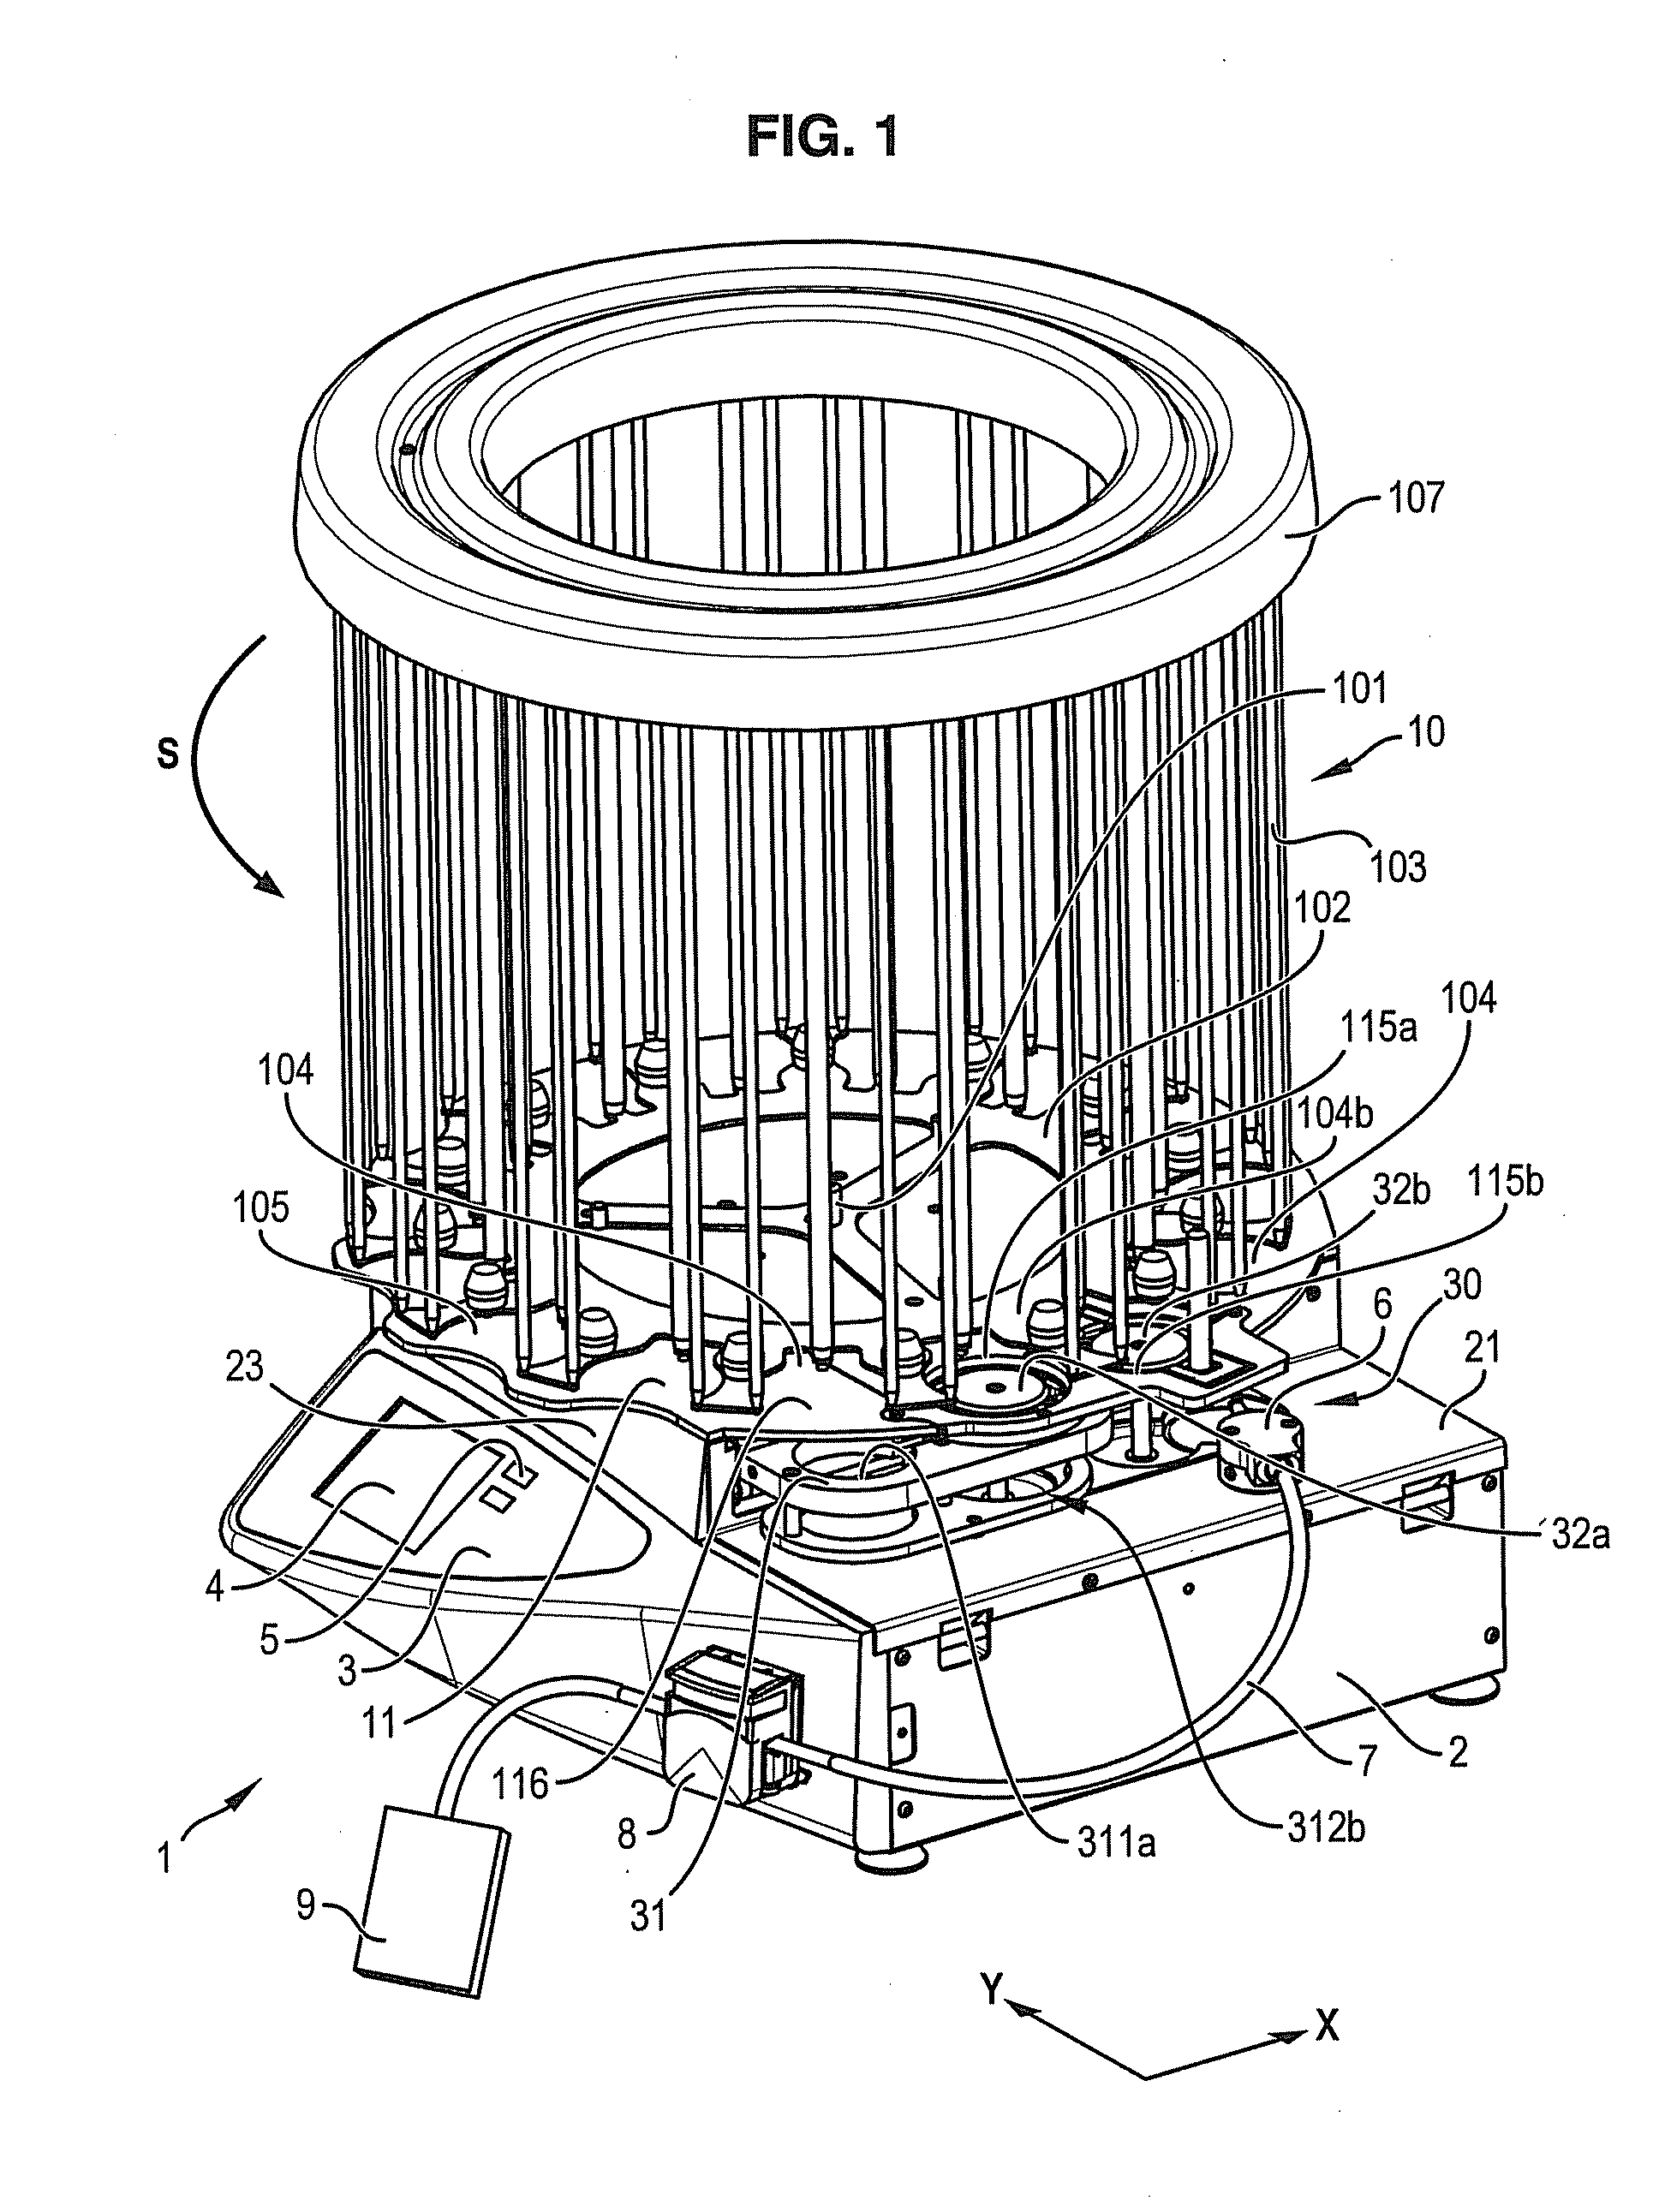 Device for dispensing a product in a petri dish